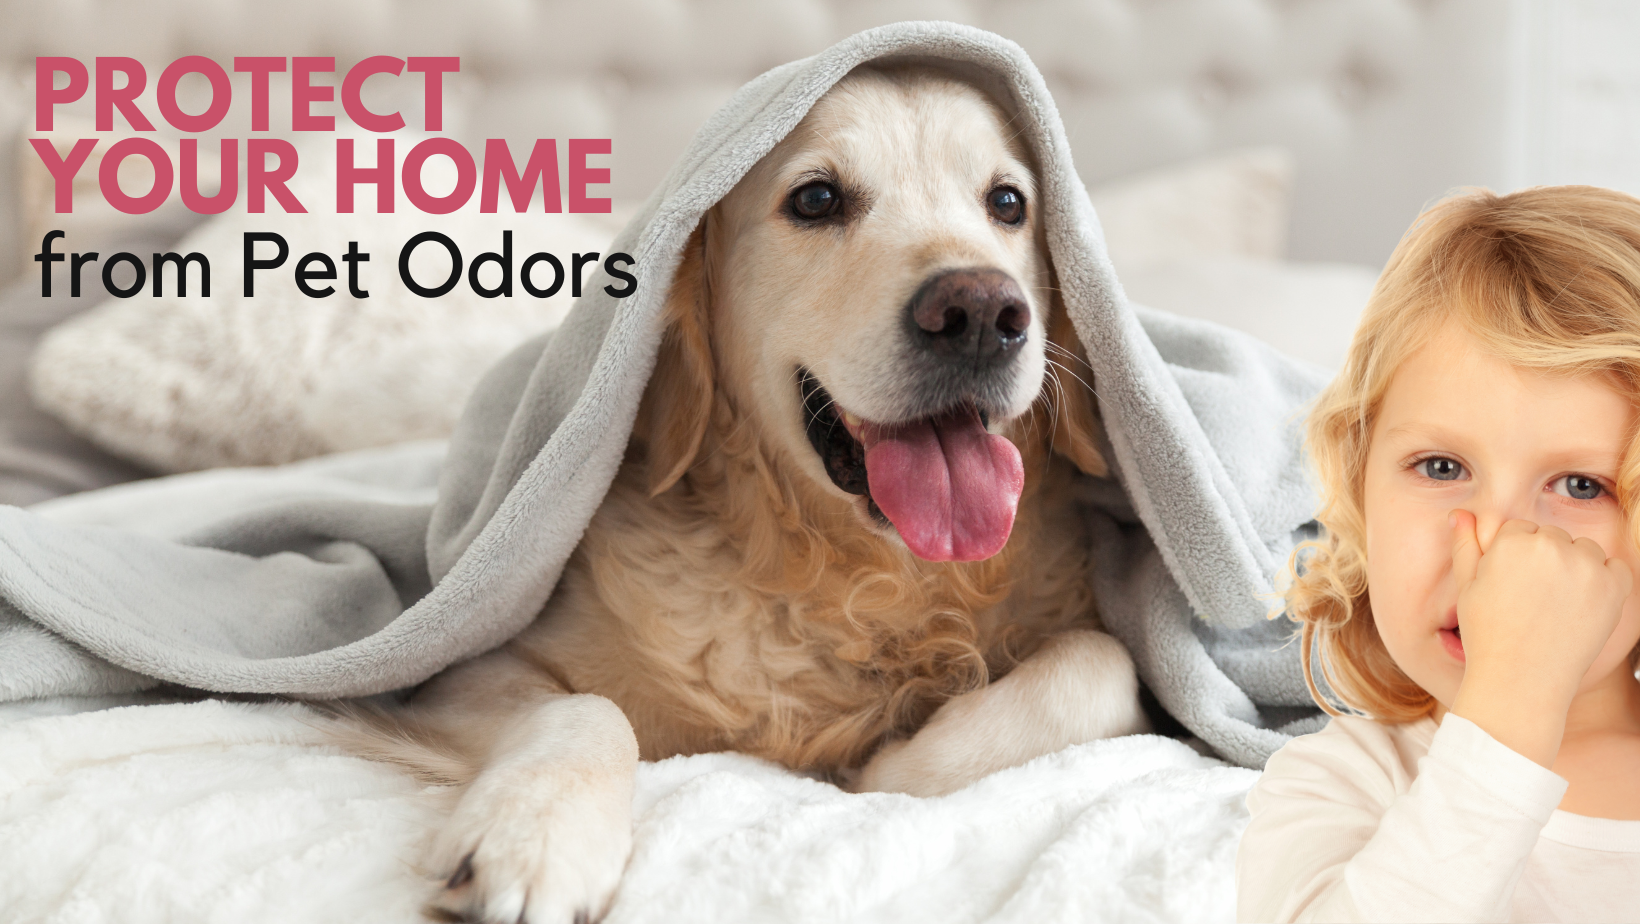 Protect your home from pet odors